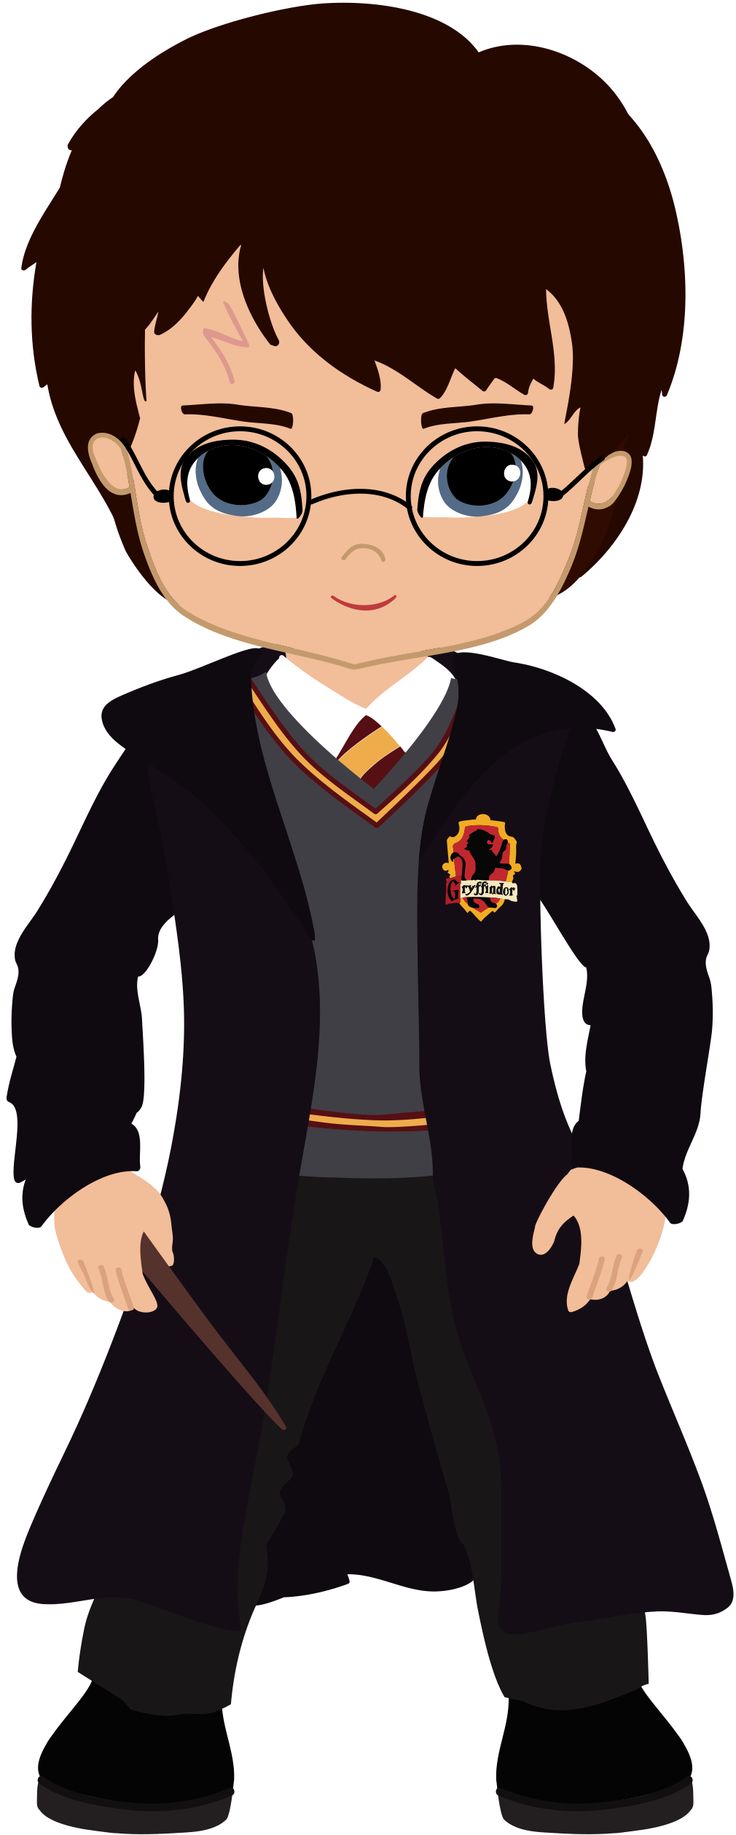 hogwarts clipart black and wh